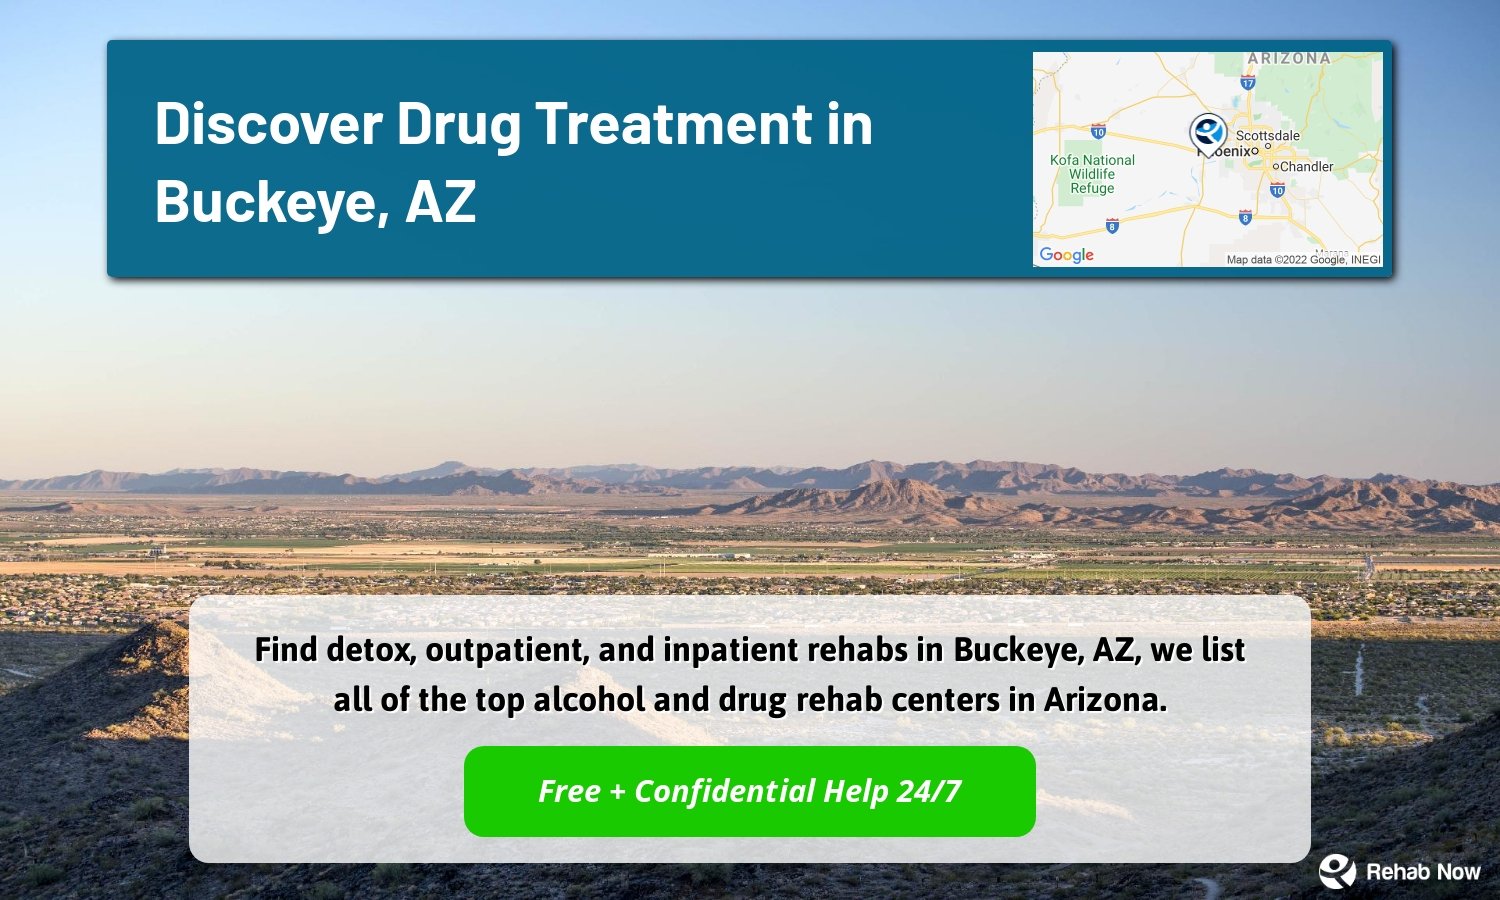 Find detox, outpatient, and inpatient rehabs in Buckeye, AZ, we list all of the top alcohol and drug rehab centers in Arizona.